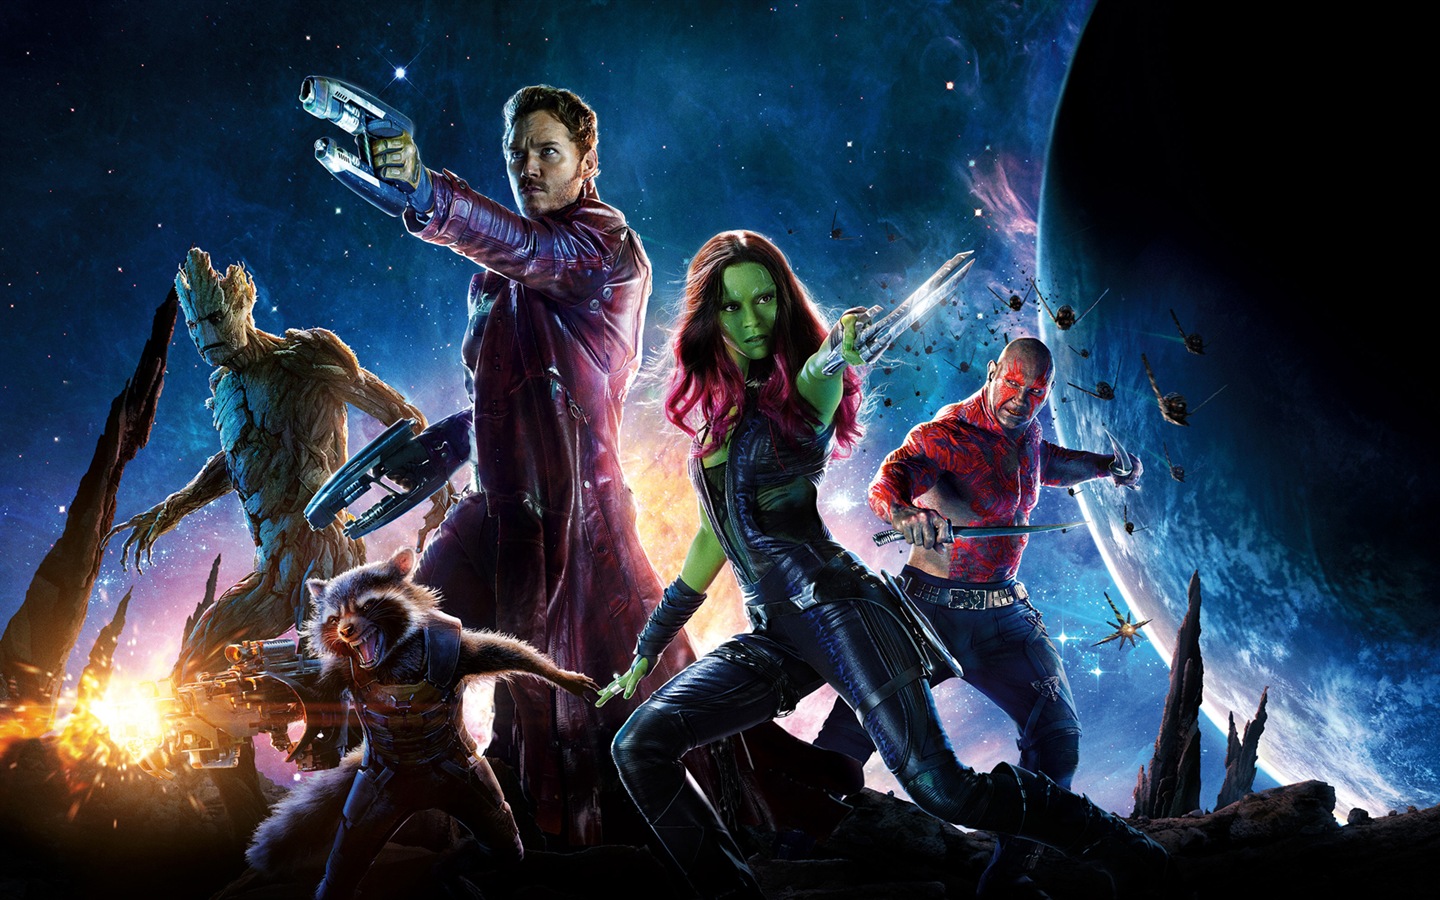 Guardians of the Galaxy 2014 HD movie wallpapers #9 - 1440x900